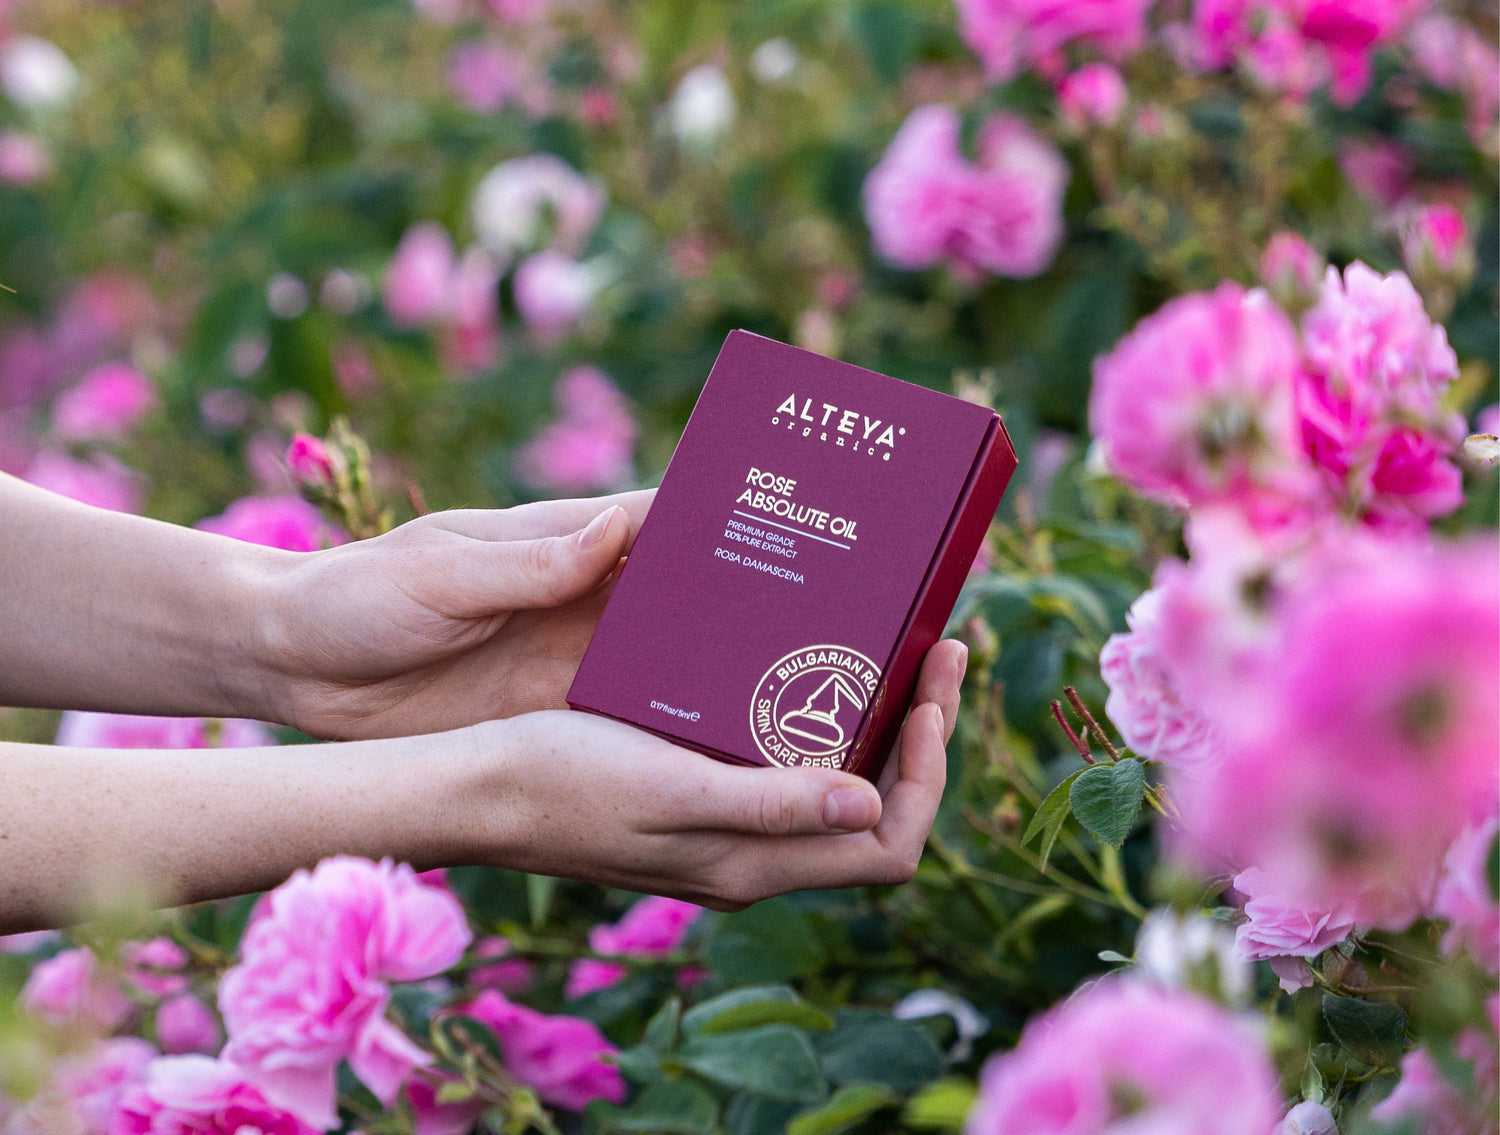 A person holding a passport in front of rosa damascena flowers.